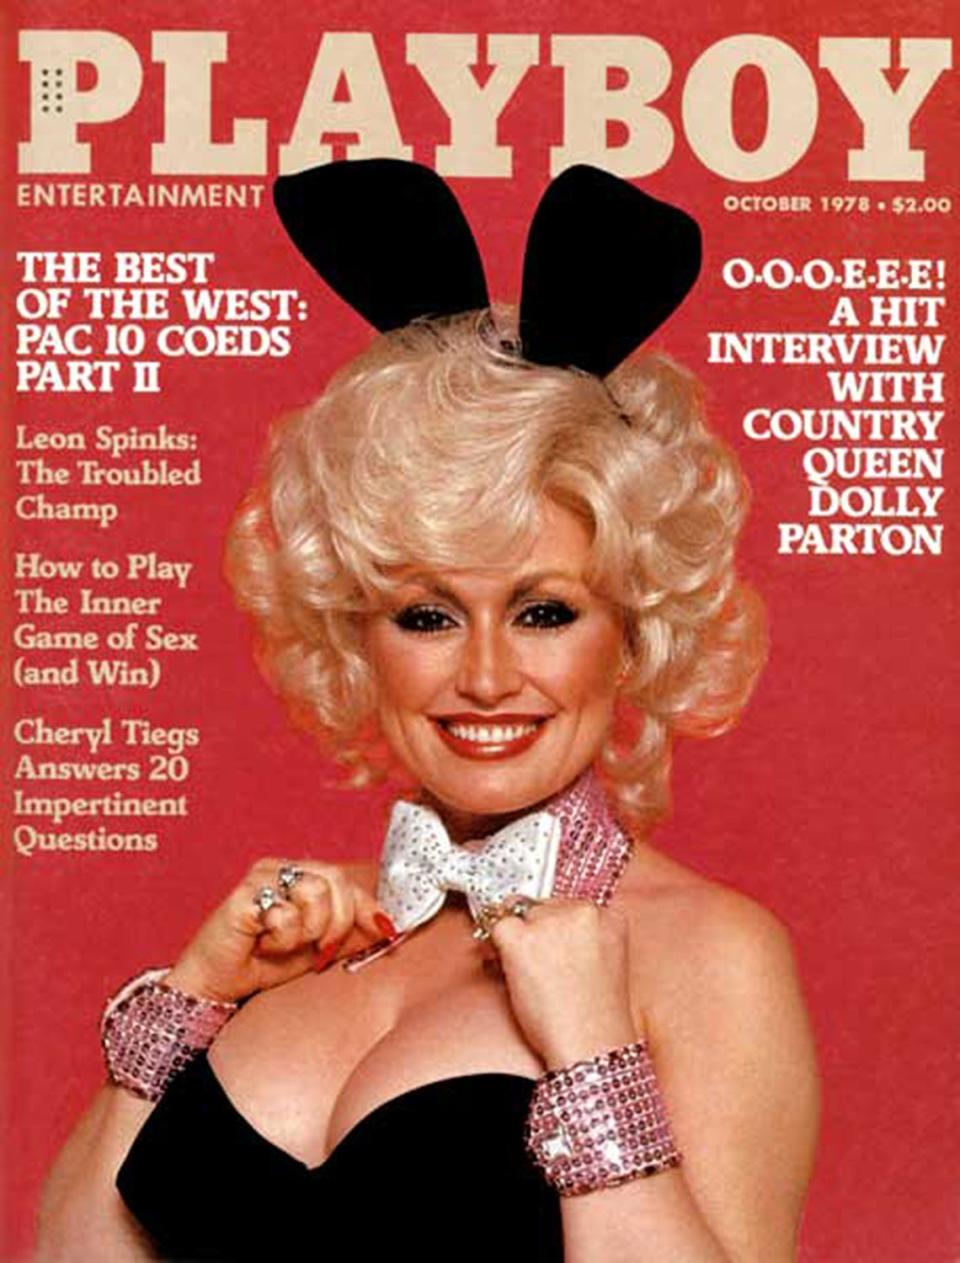 Dolly Parton in a the Playboy Bunny outfit.